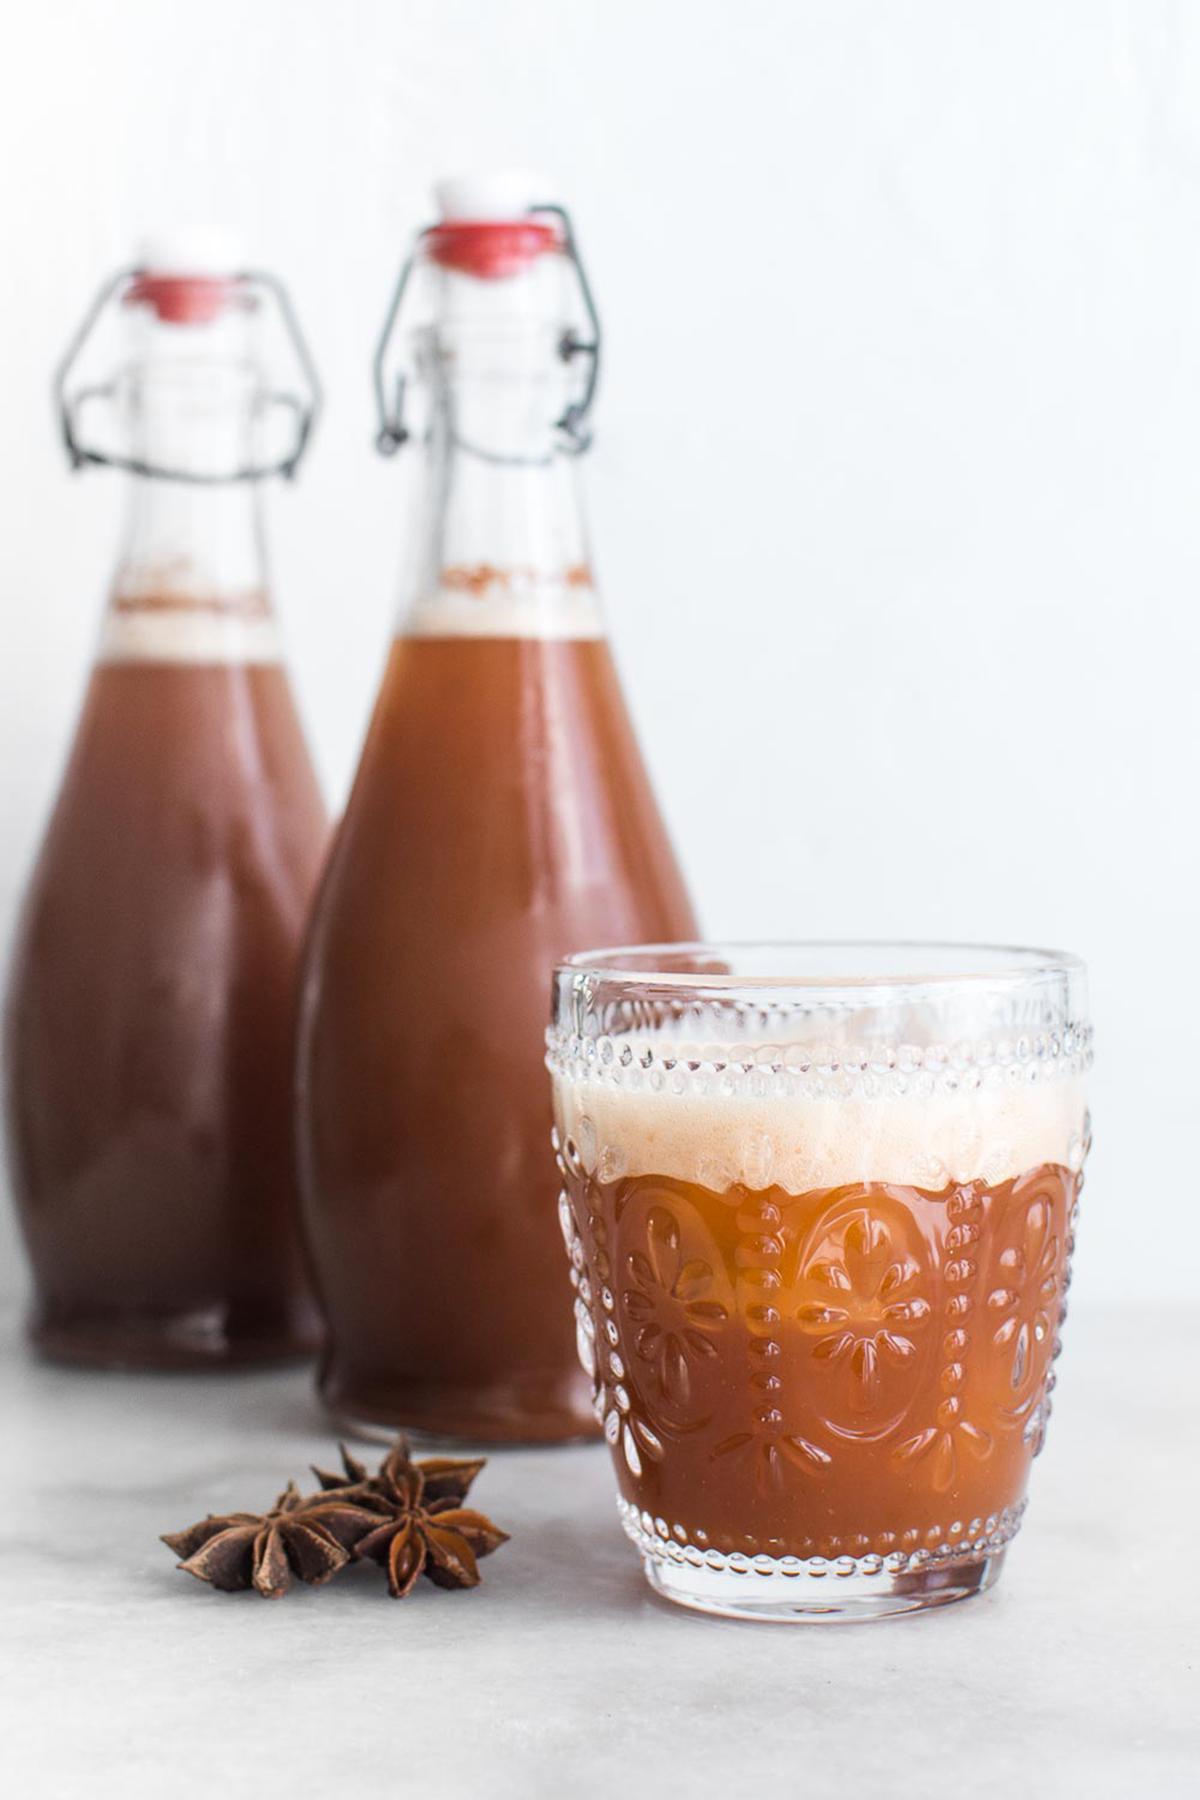 Traditional root beer is a difficult but rewarding project for the dedicated home fermenter. (Jennifer McGruther)